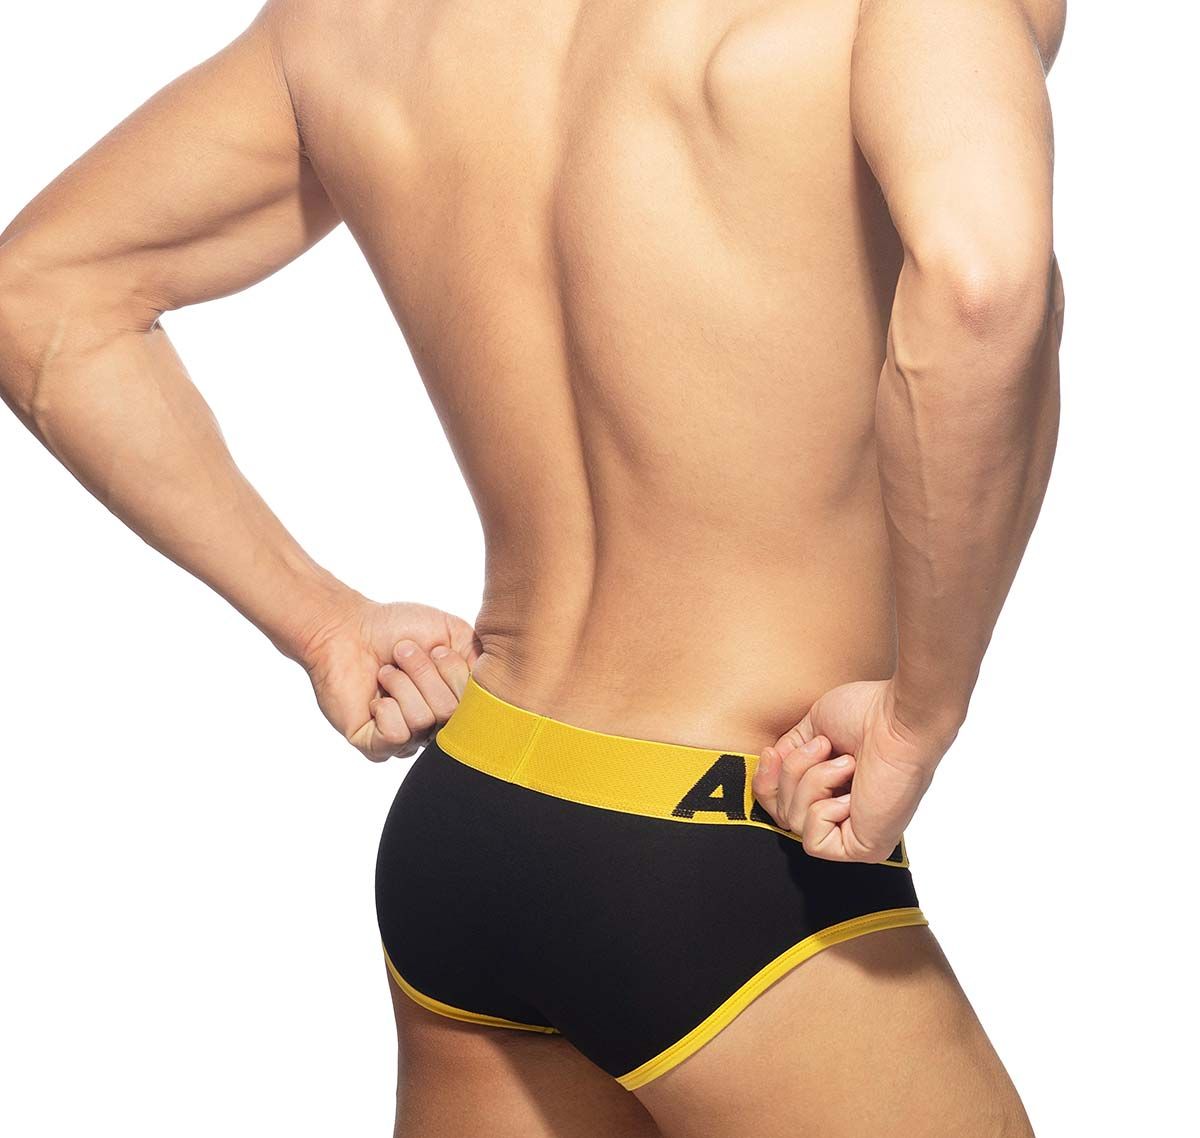 Addicted Brief OPEN FLY COTTON BRIEF AD1202, yellow